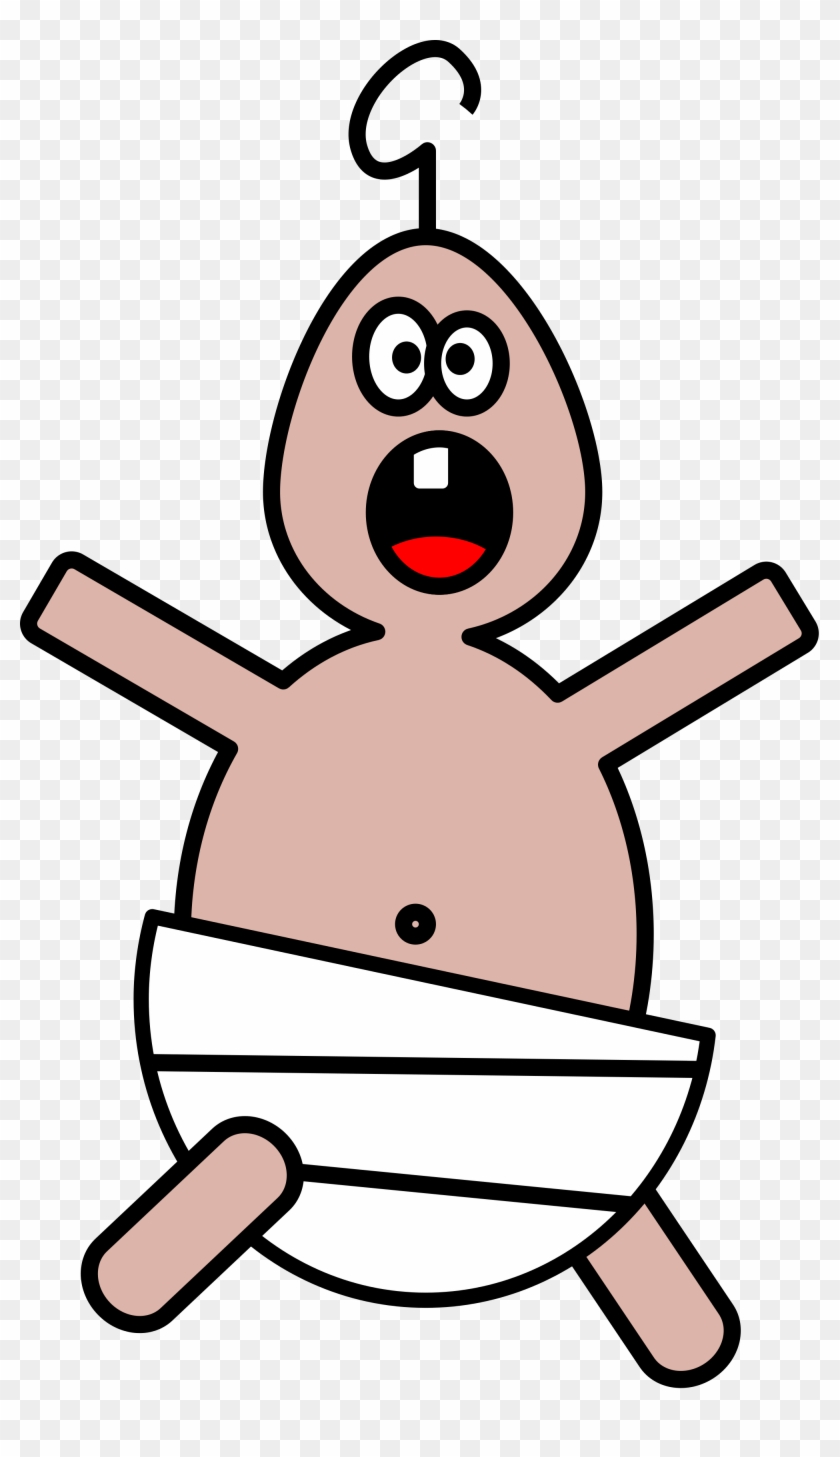 Swaddled Baby Clipart - Ugly Baby Clip Art #109347